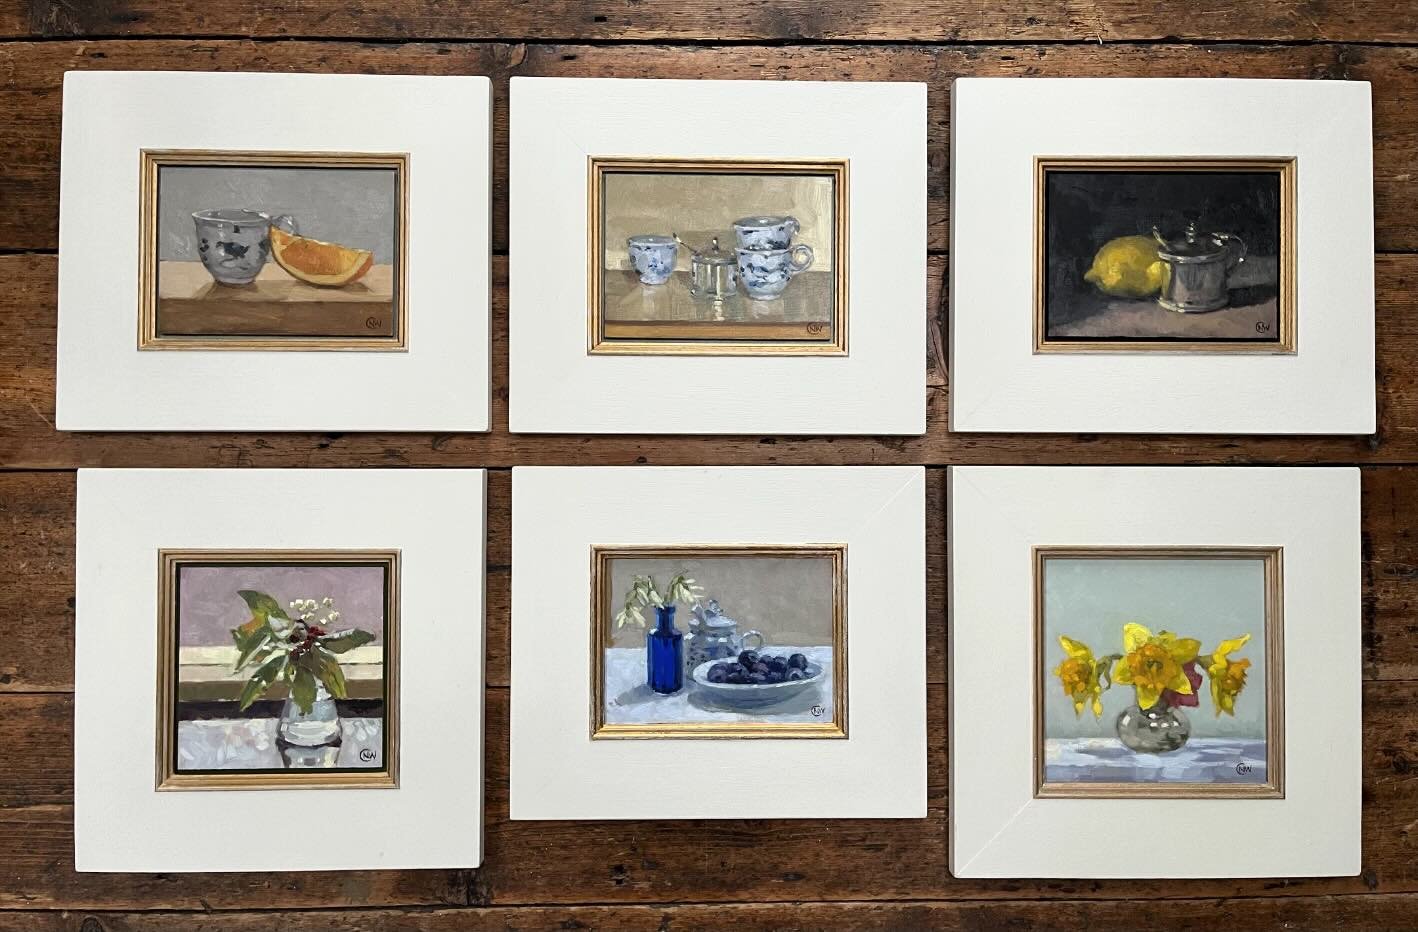 I just delivered these six little paintings to the Hunter Gallery in Bury St Edmunds which are going to the Fresh Art Fair in Cheltenham next week (25th-28th April). Very excited to be taking part in this and grateful to Jacqueline @thehuntergallery 